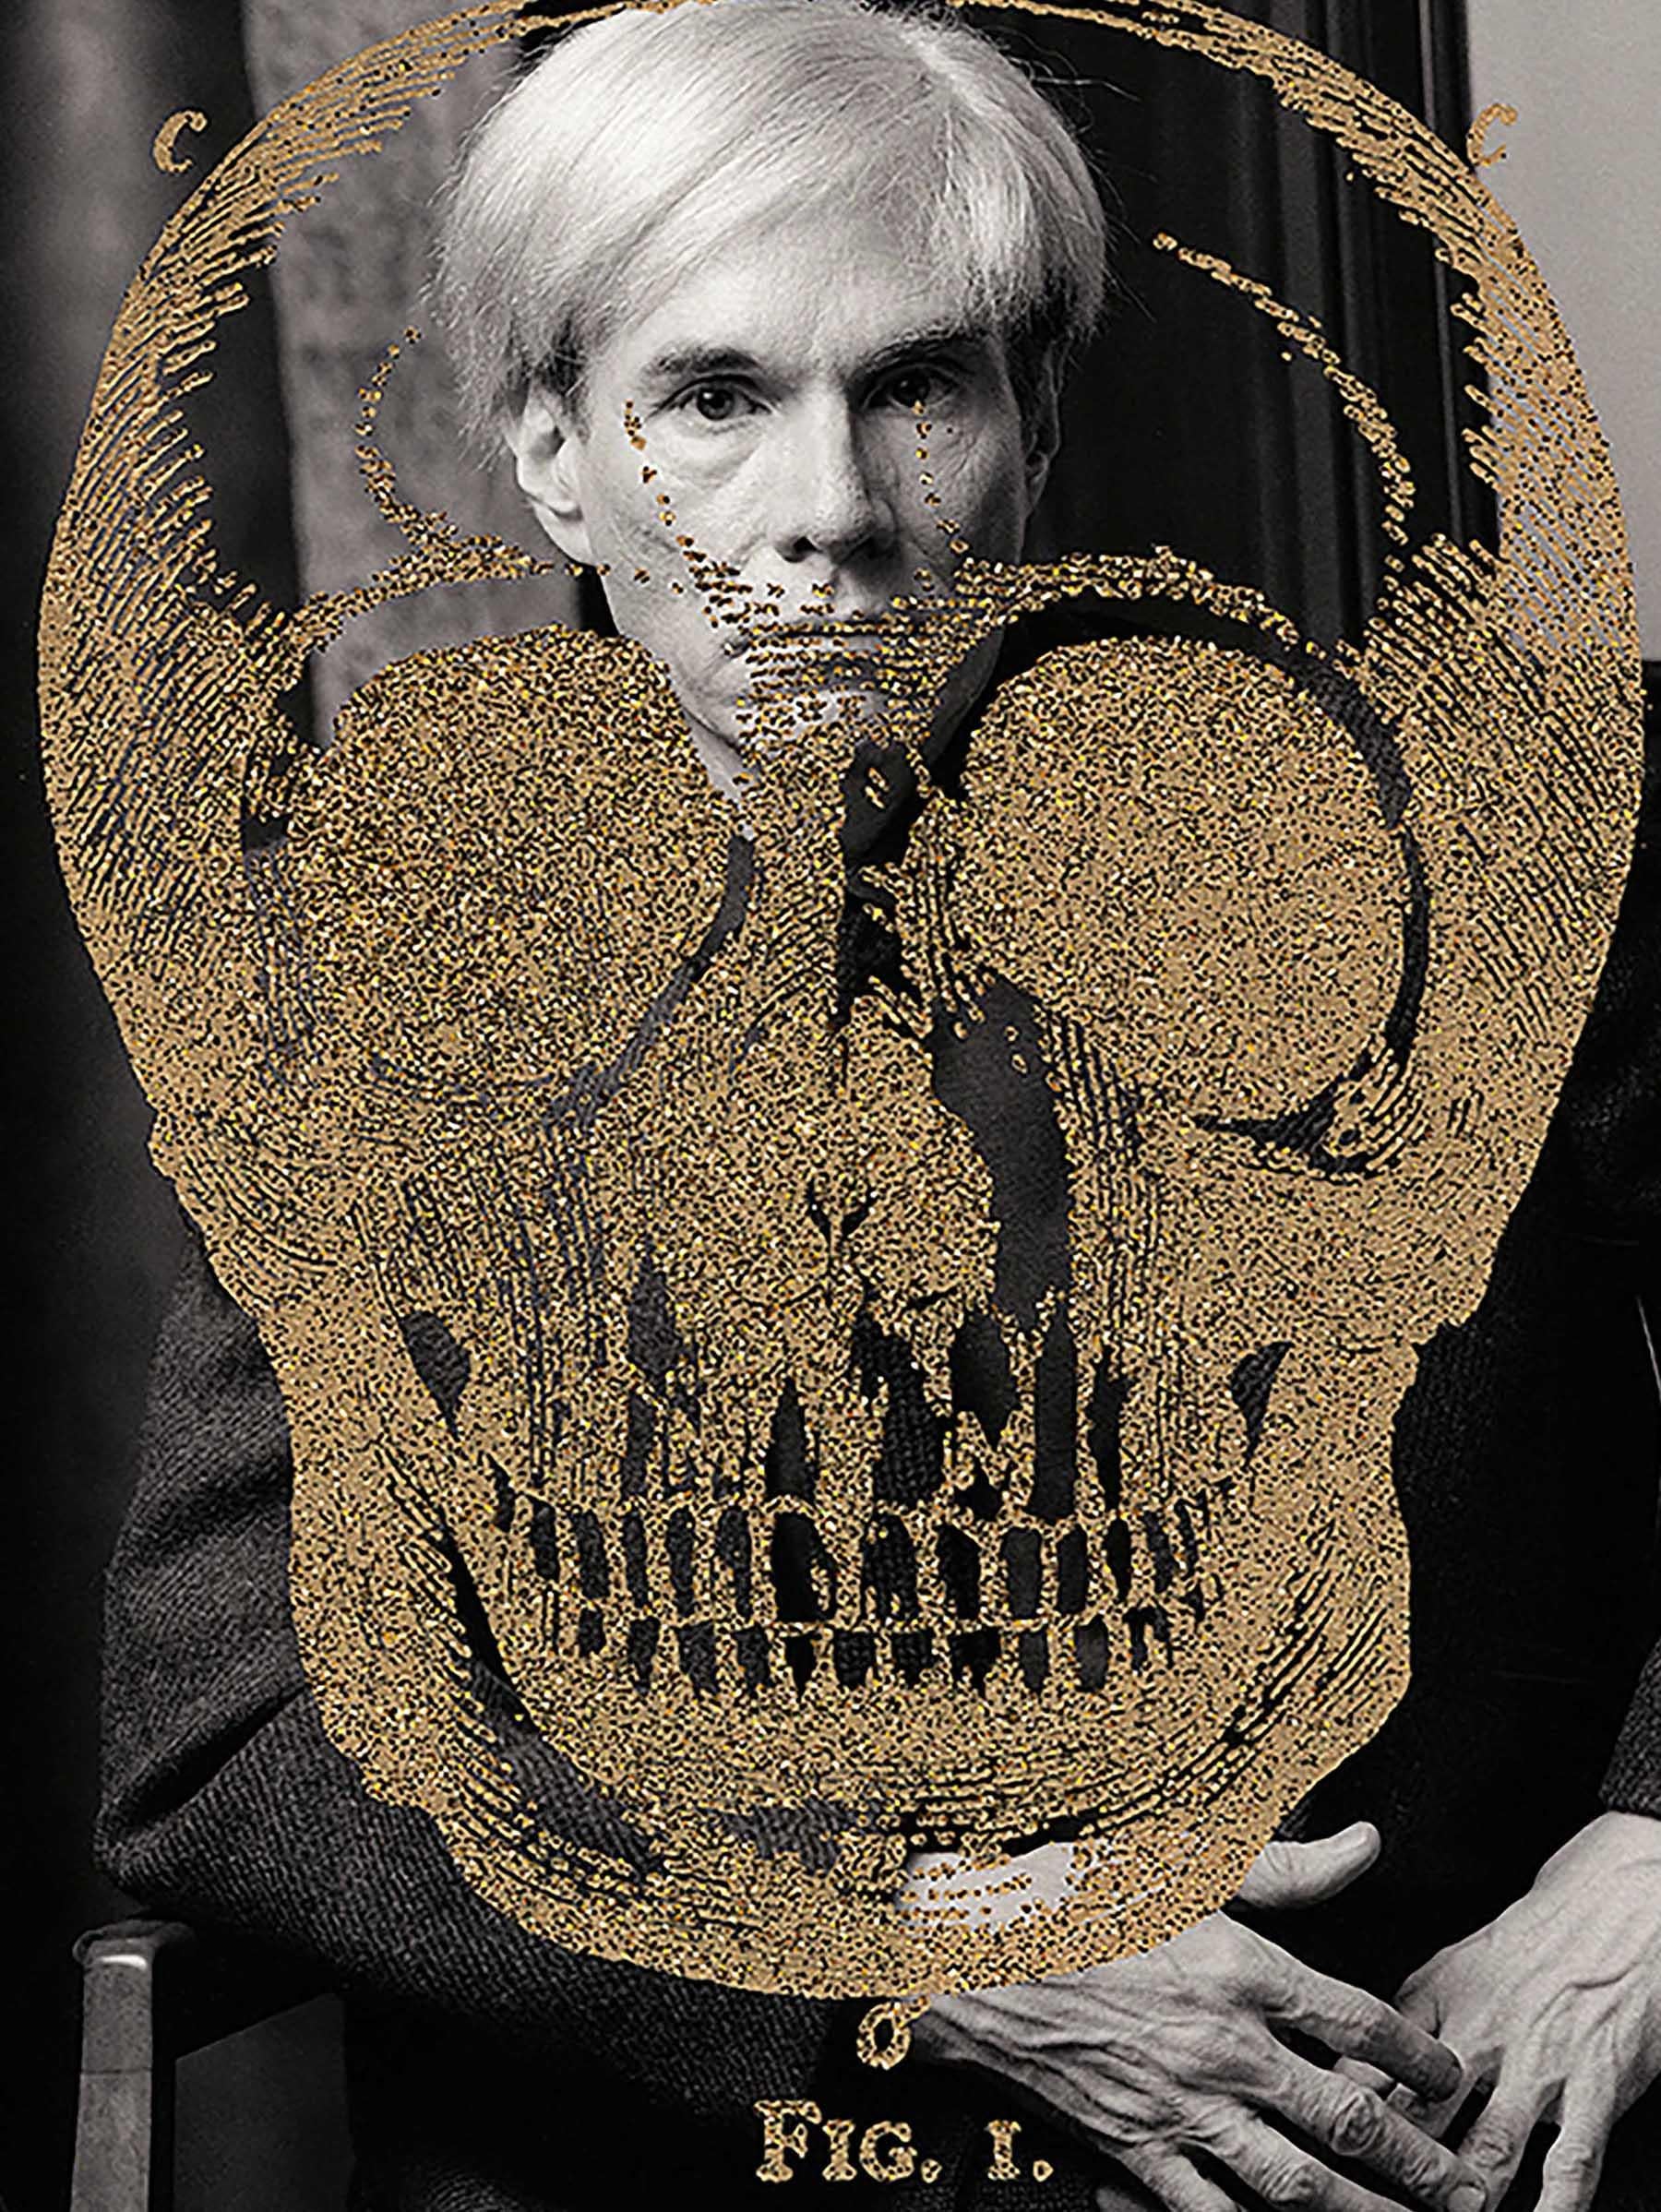 Gold Britannica Skull on Warhol, 2011 - Photograph by Karen Bystedt and Peter Tunney